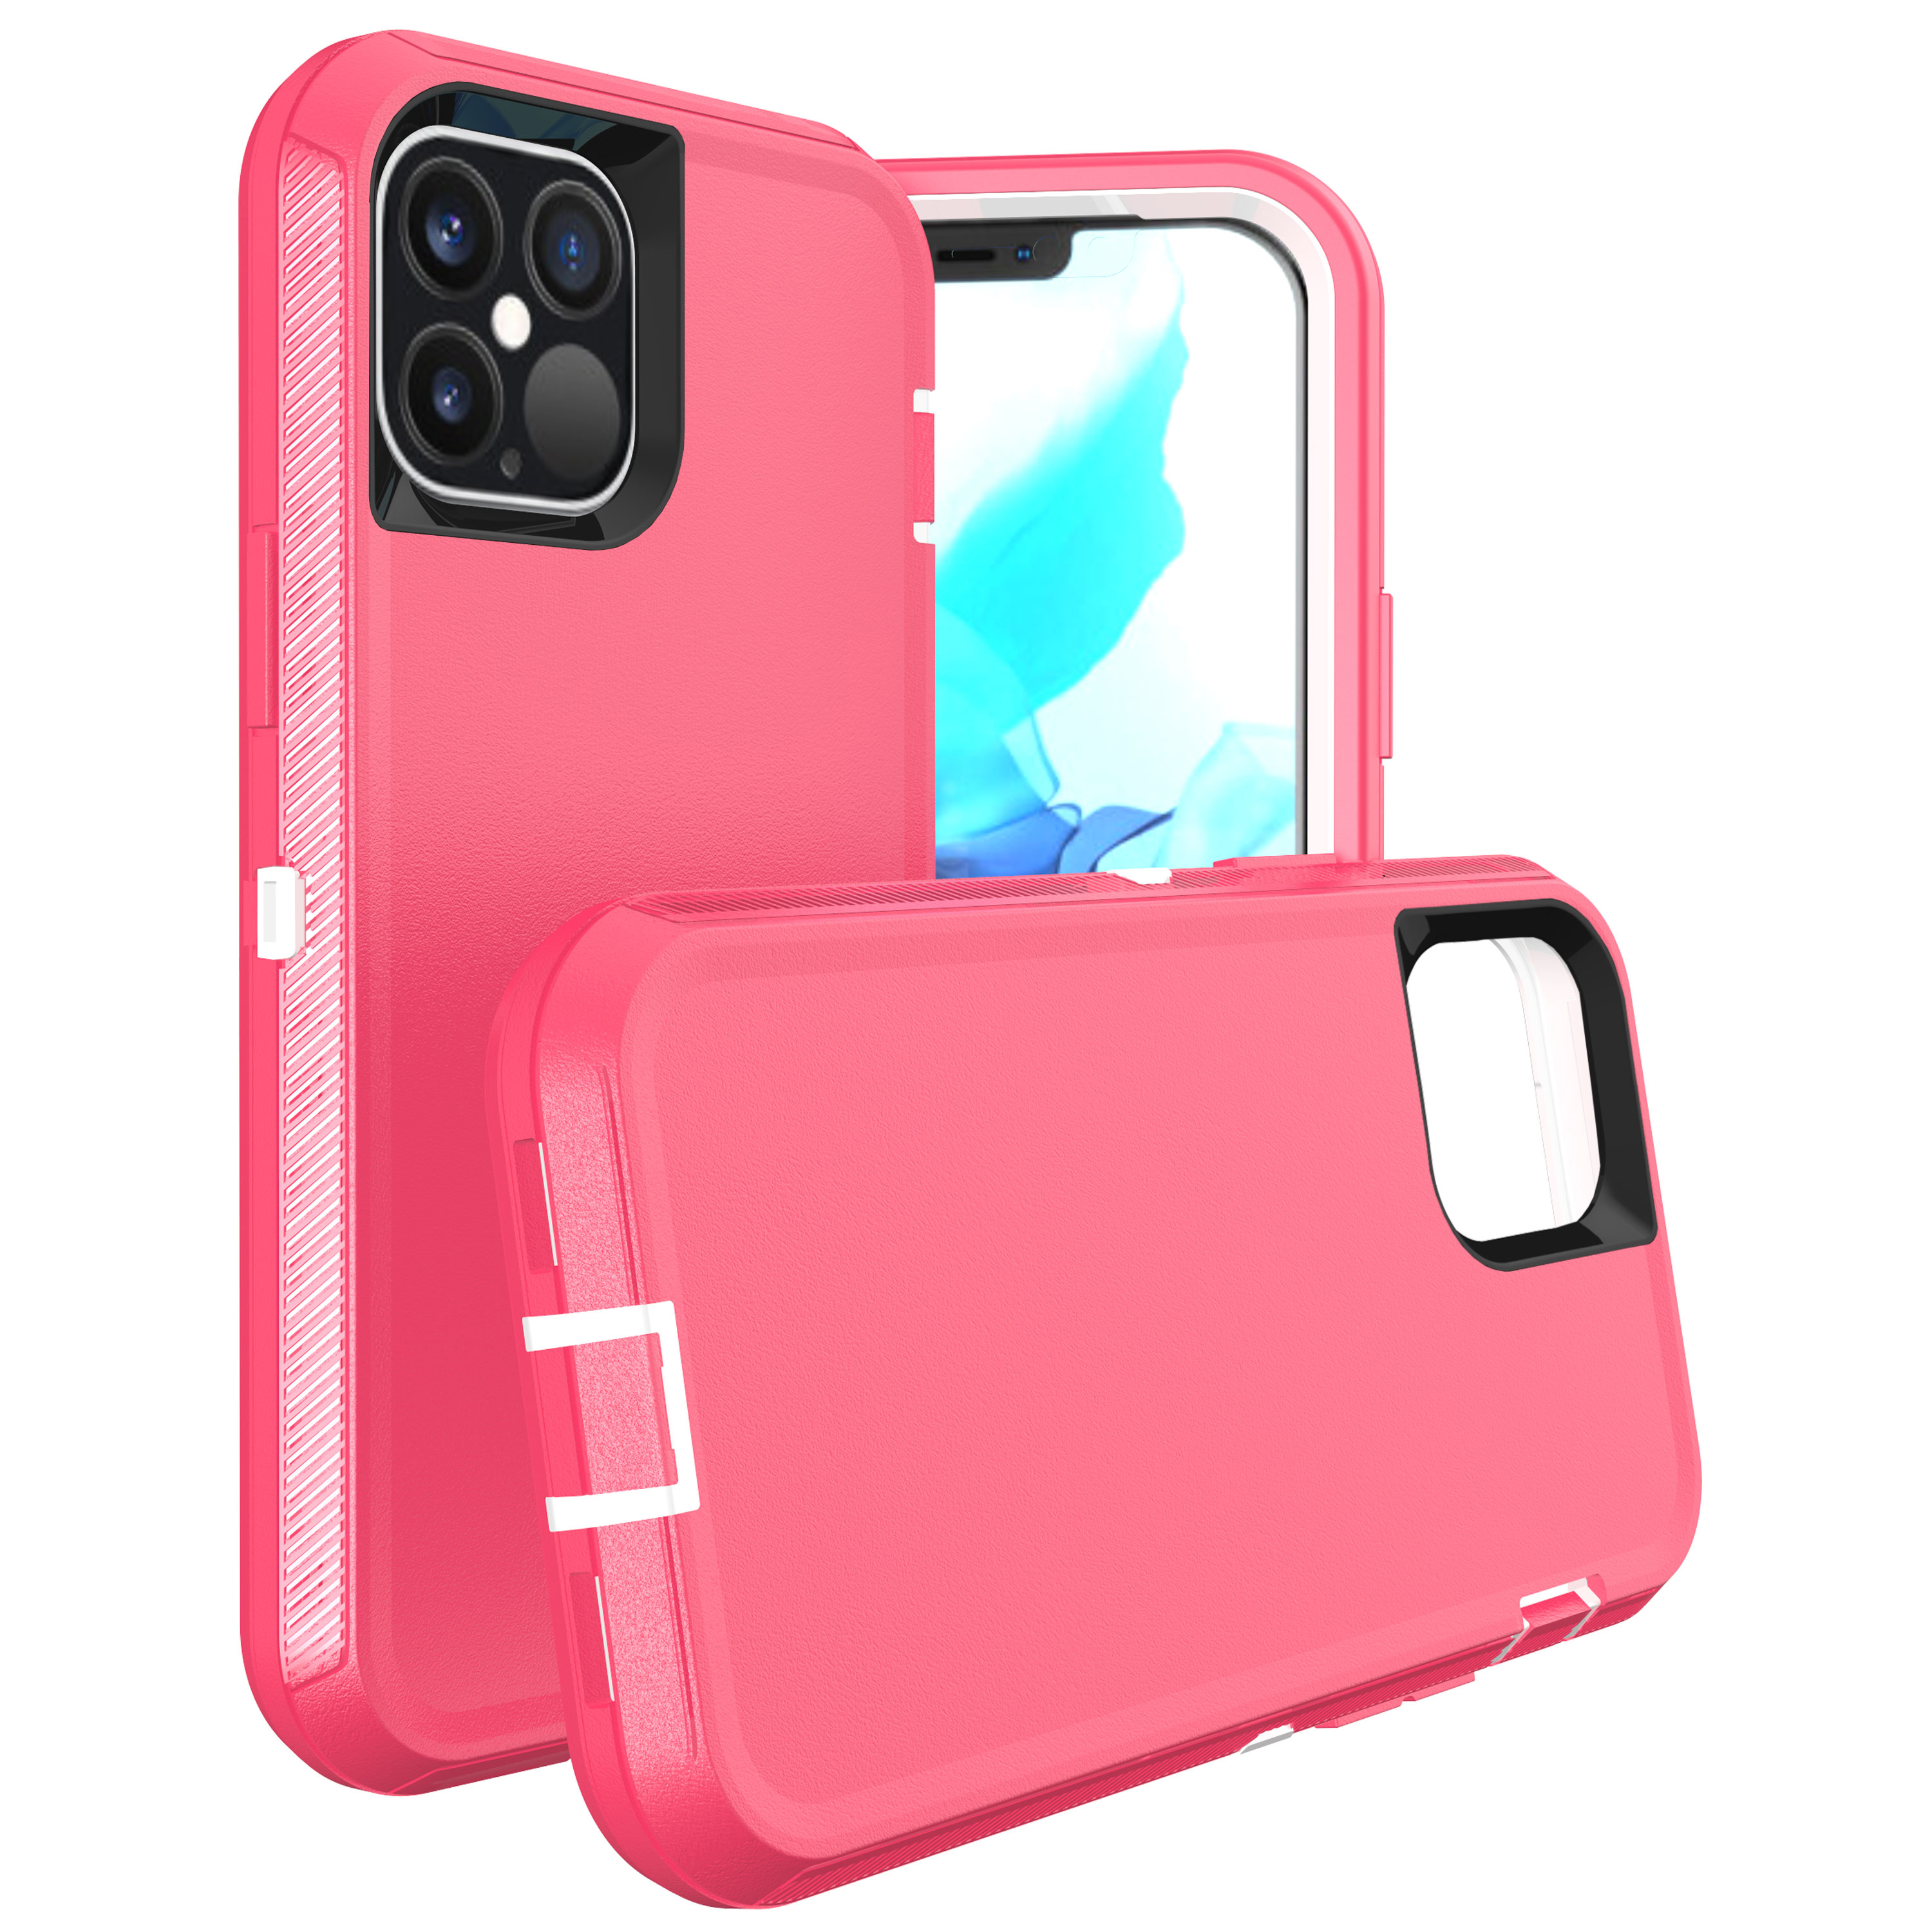 Armor Robot Case for iPHONE 12 Mini 5.4 (Hot Pink - White)